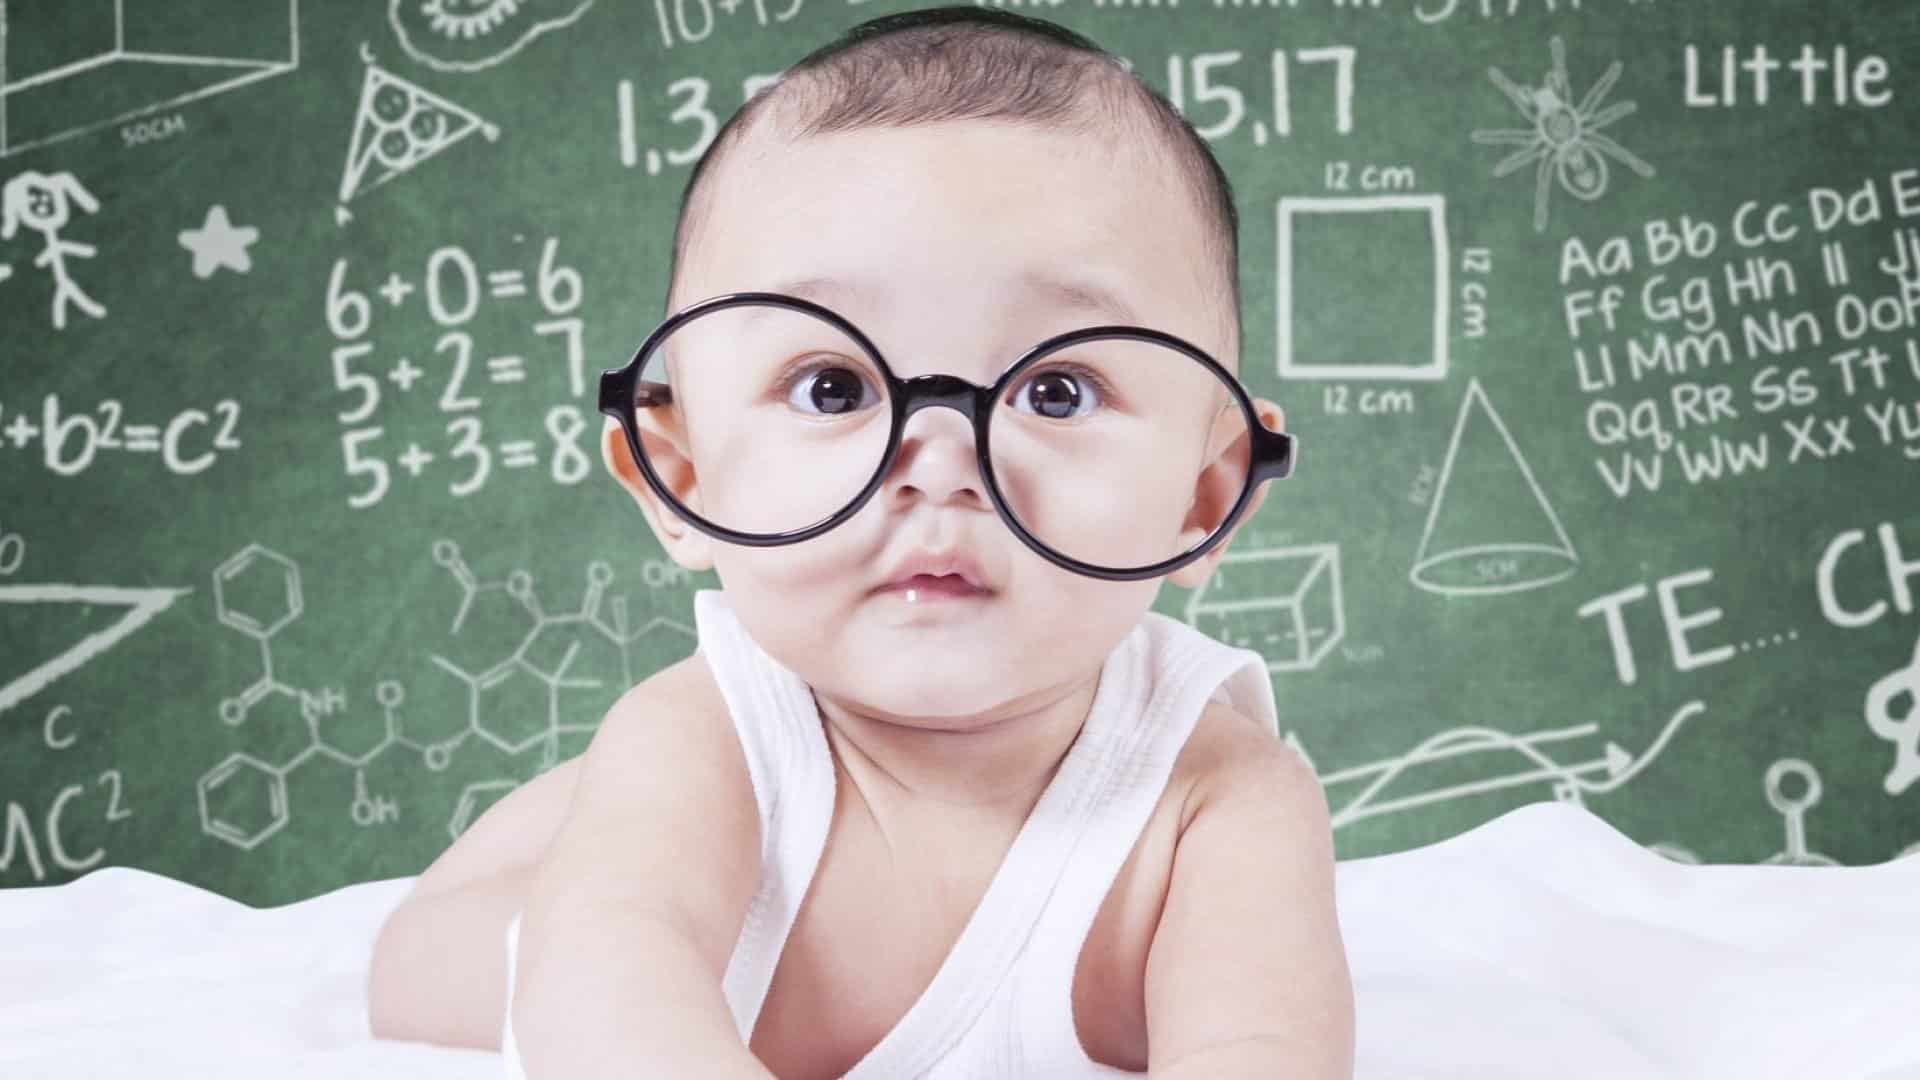 Toddler with IQ of 146 becomes youngest member of American Mensa